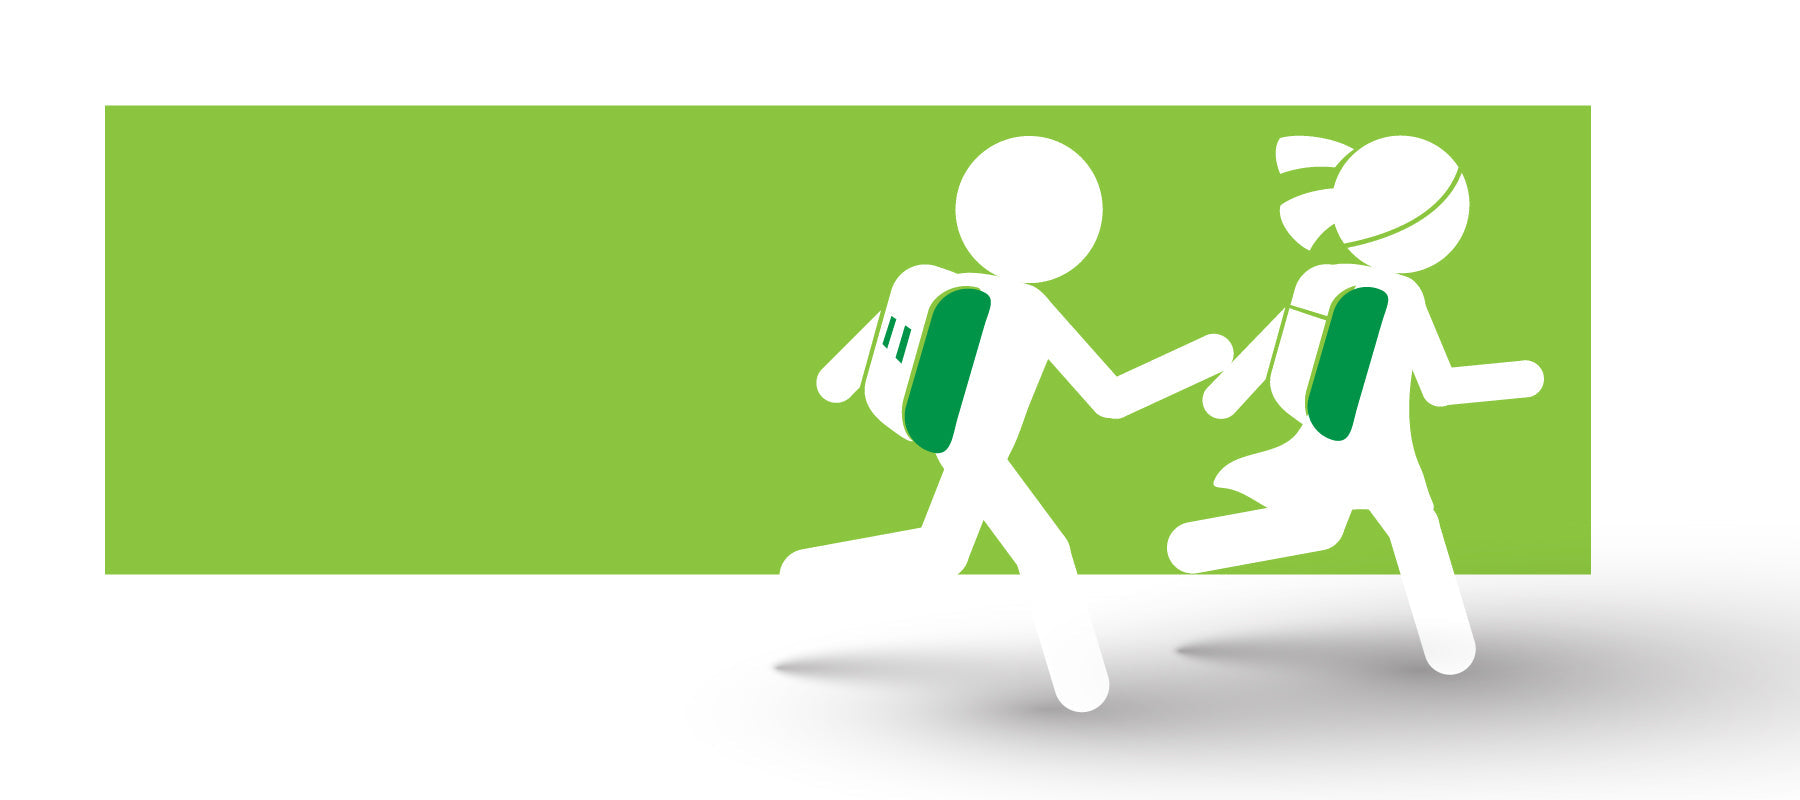 Who white figures running with backpacks, silhouetted on a green background.